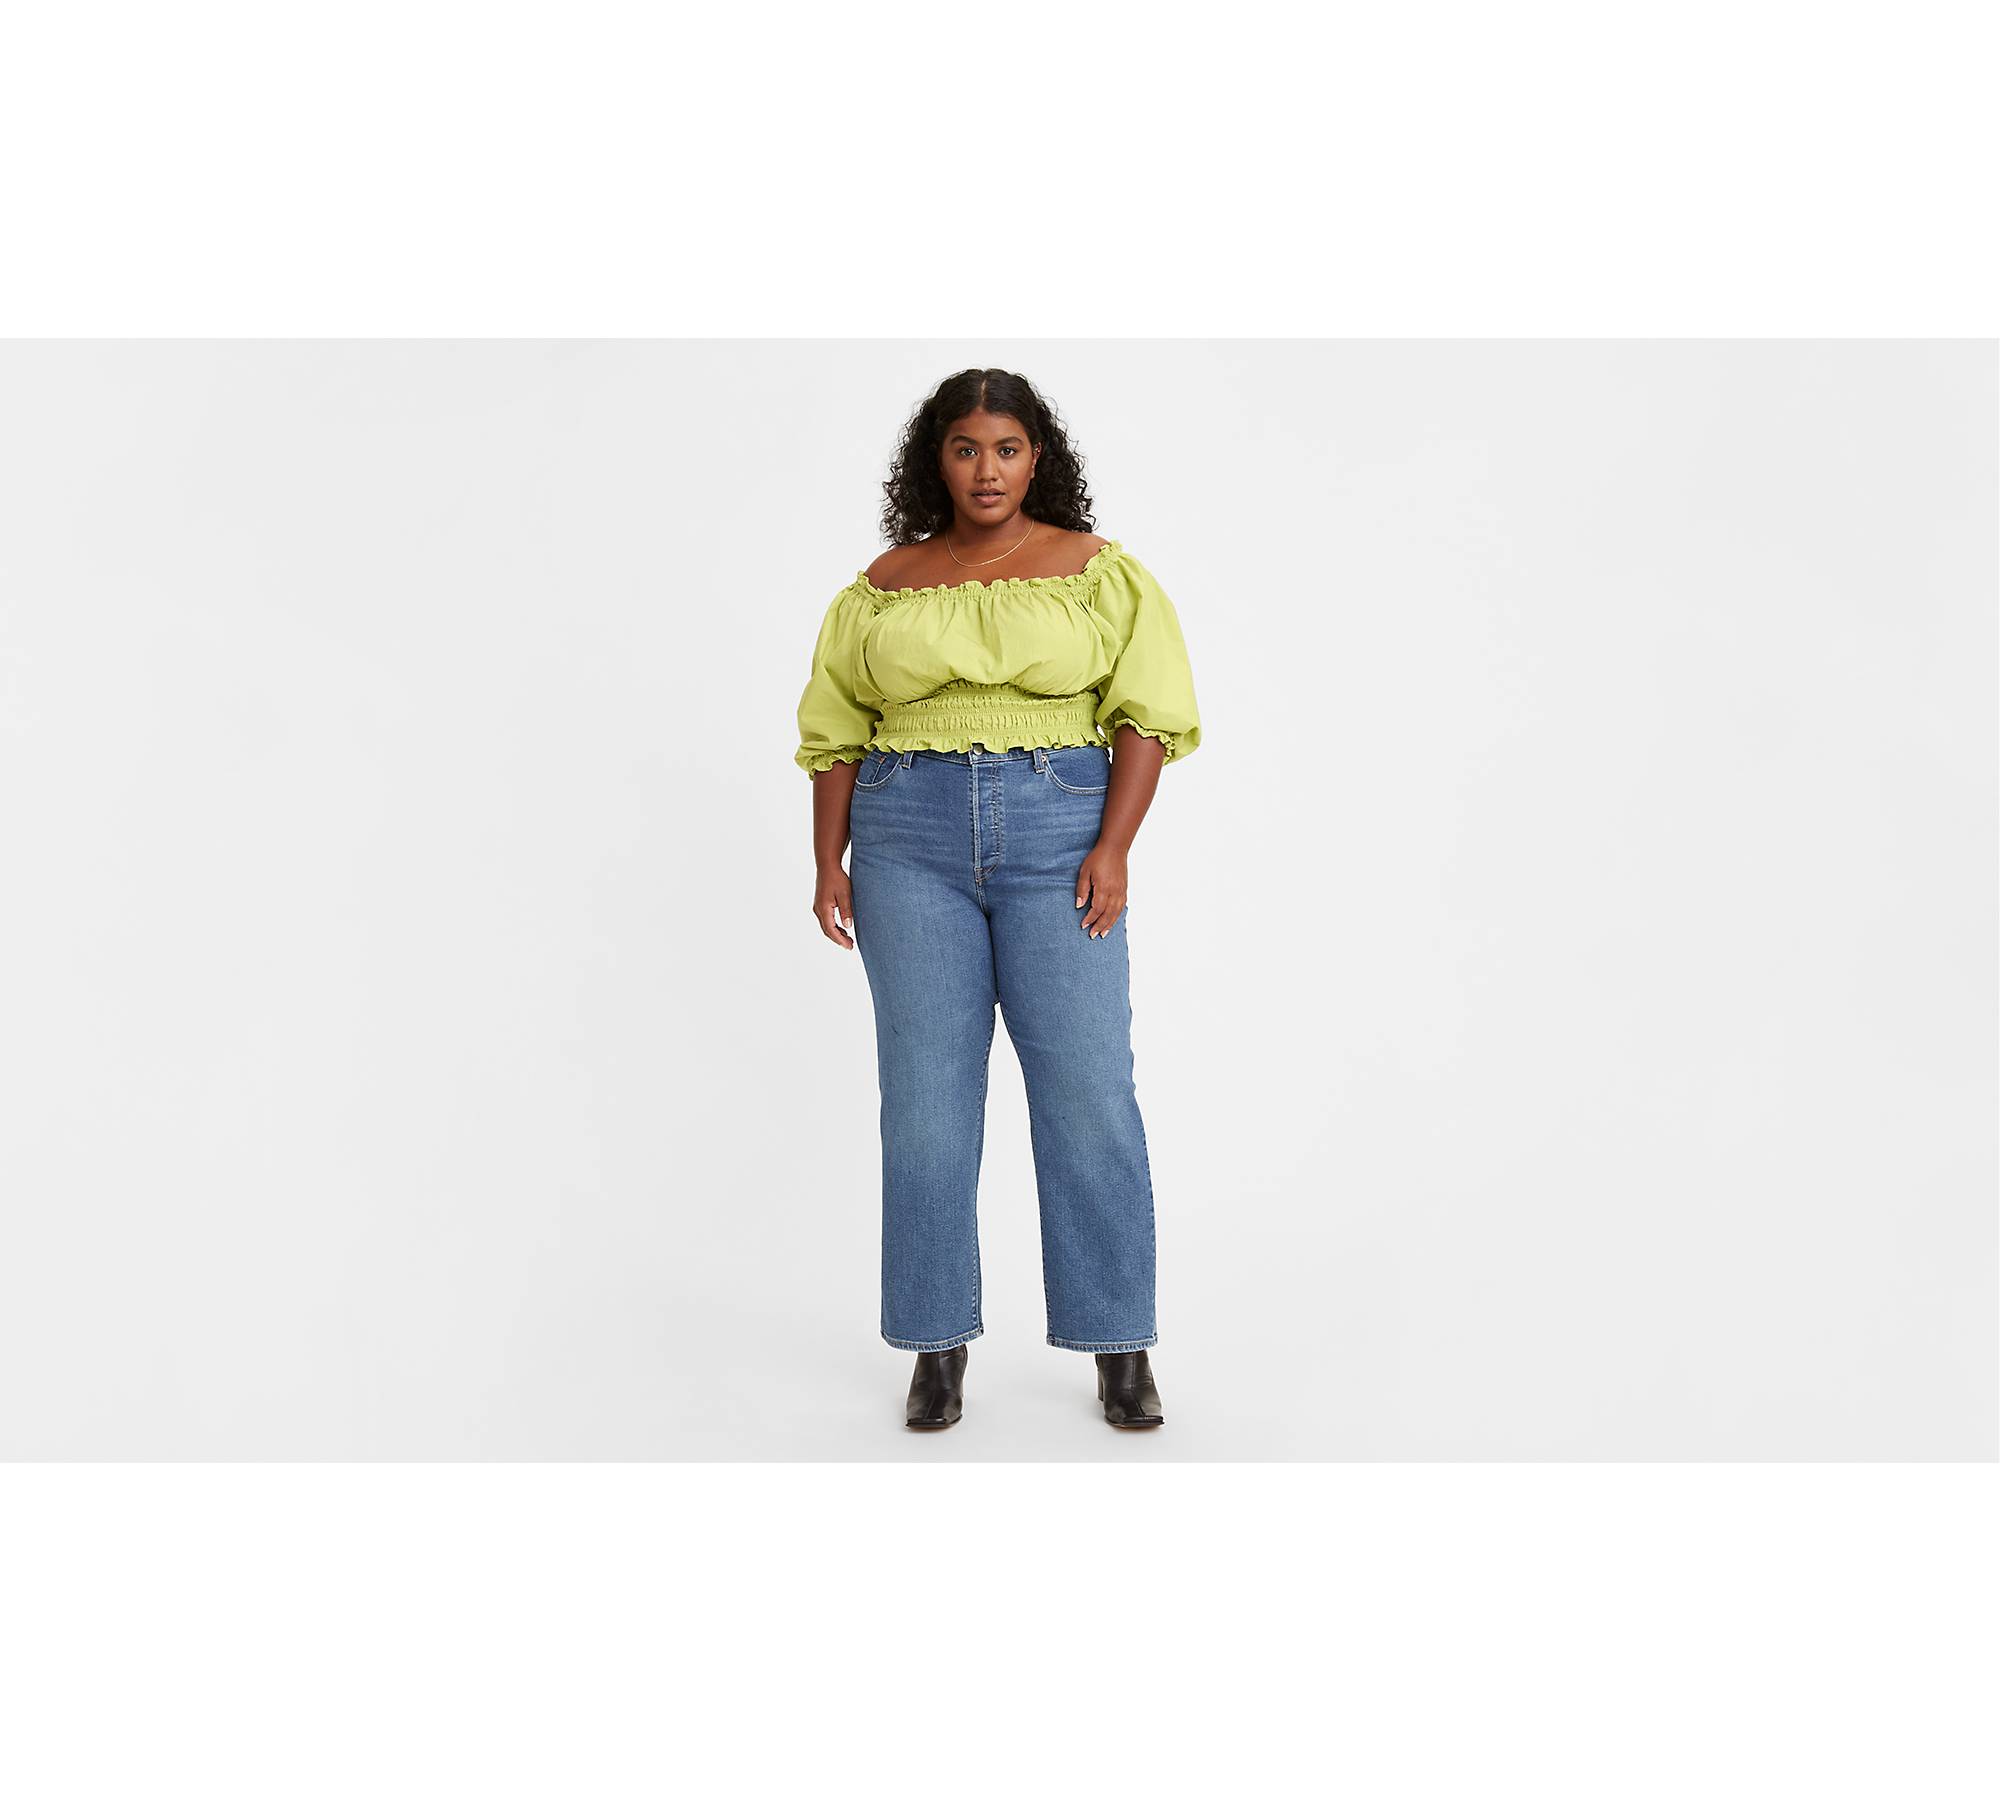 6 plus-size jeans that hit every curve of your body